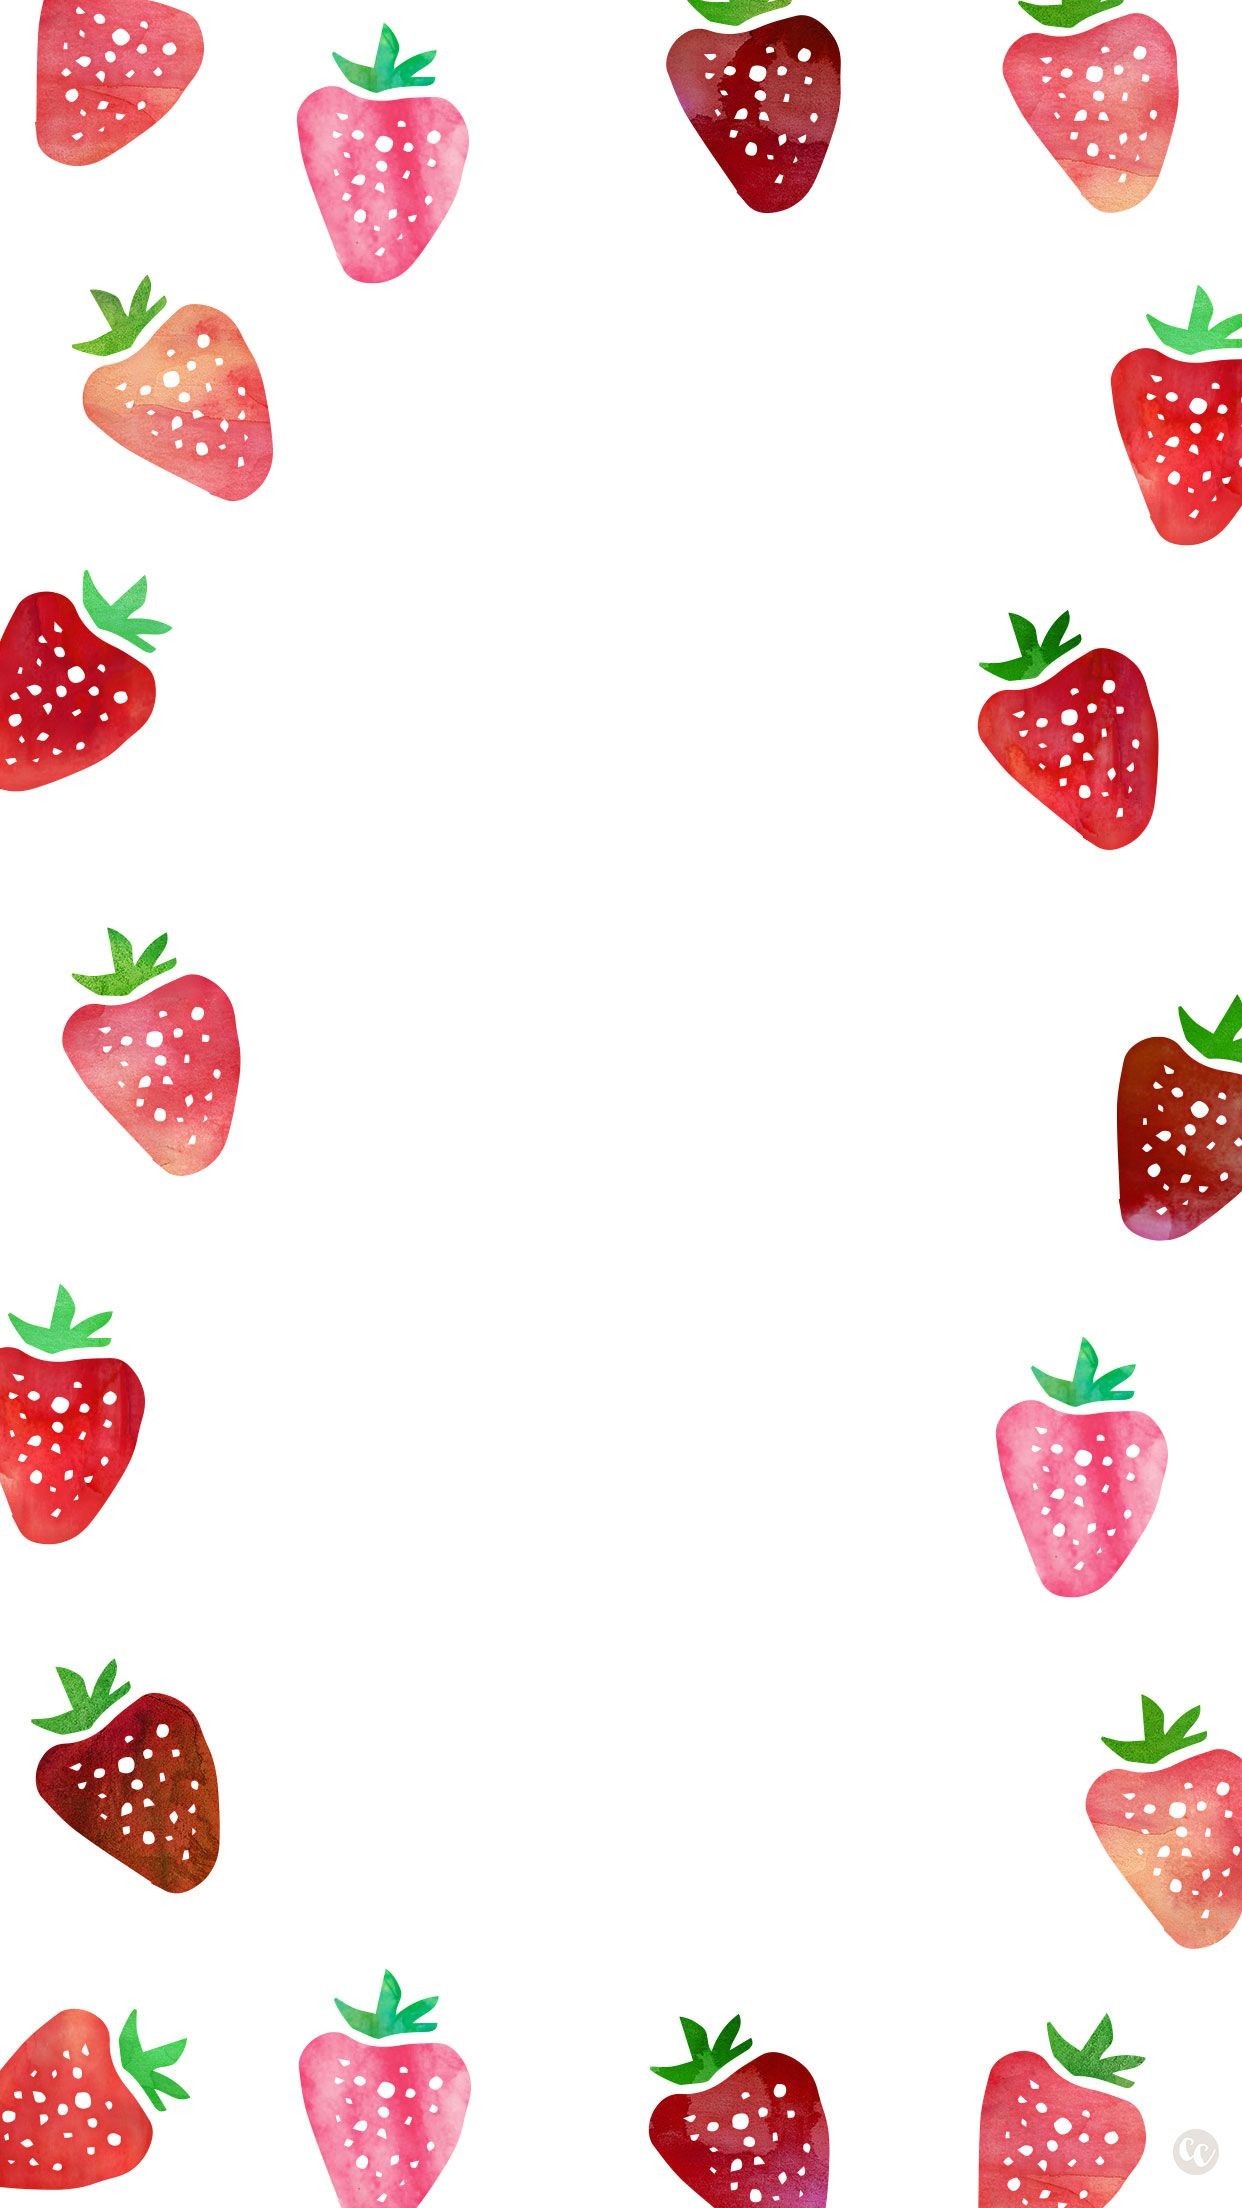 1242x2208  Dress up your smartphone with this cute strawberry wallpaper!  Also available for desktop and iPad. Download here.